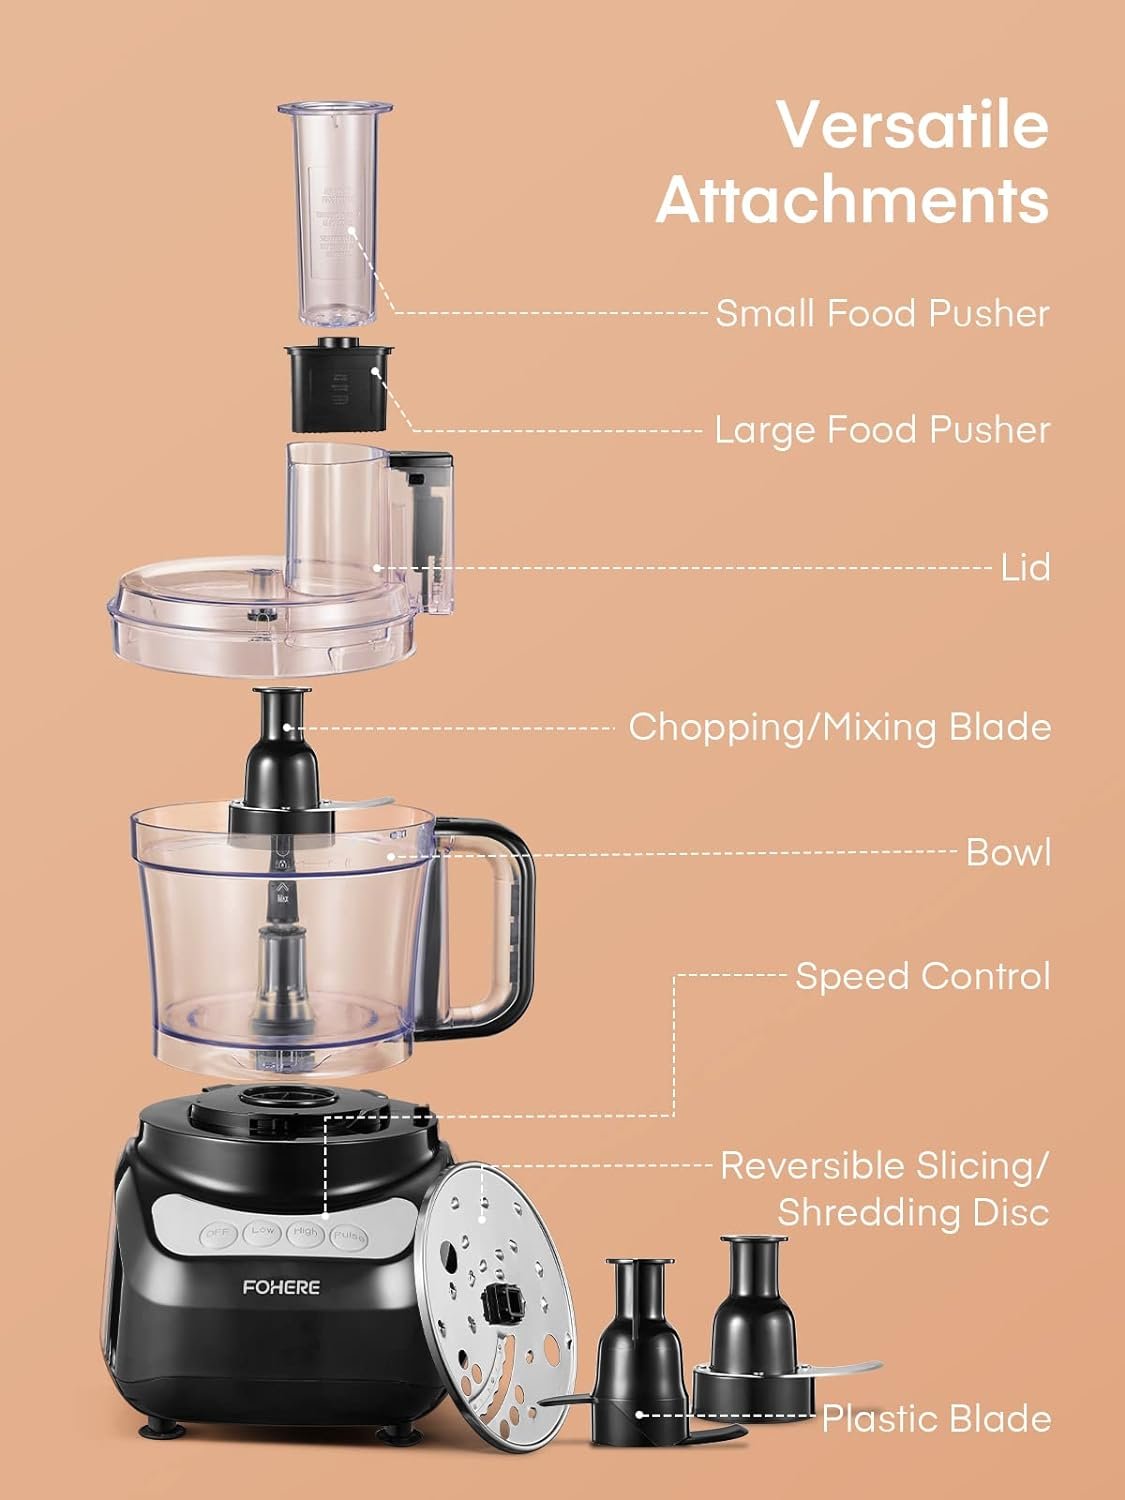 FOHERE Food Processor, 12 Cup, 2-in-1 Feed Chute Vegetable Chopper  Meat Grinder for Mincing, Dicing, Shredding, Puree  Kneading Dough, Stainless Steel